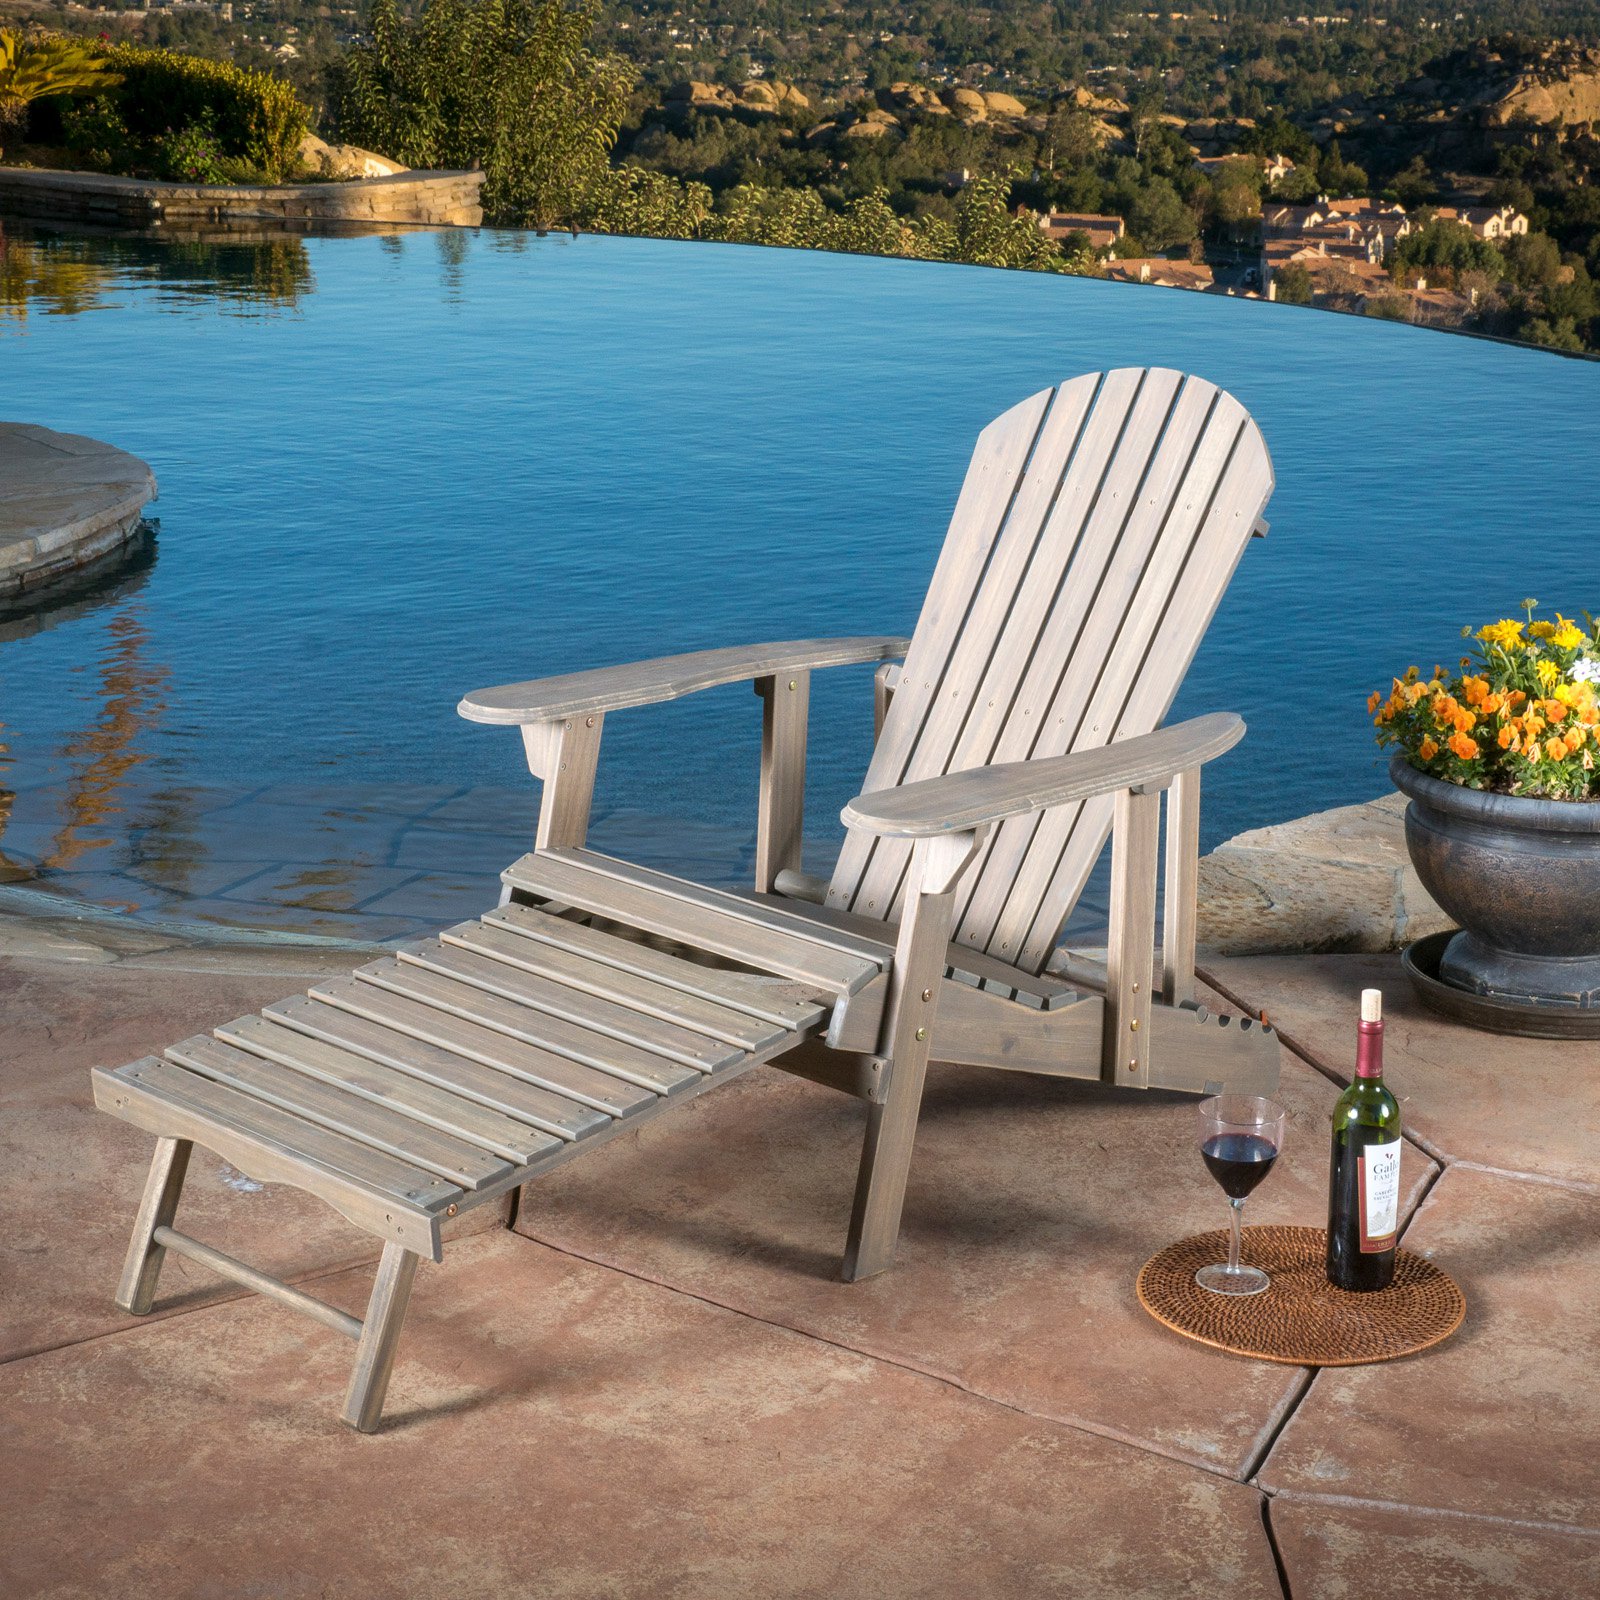 Hayle Reclining Adirondack Chair with Footrest - Set of 2 - image 1 of 11